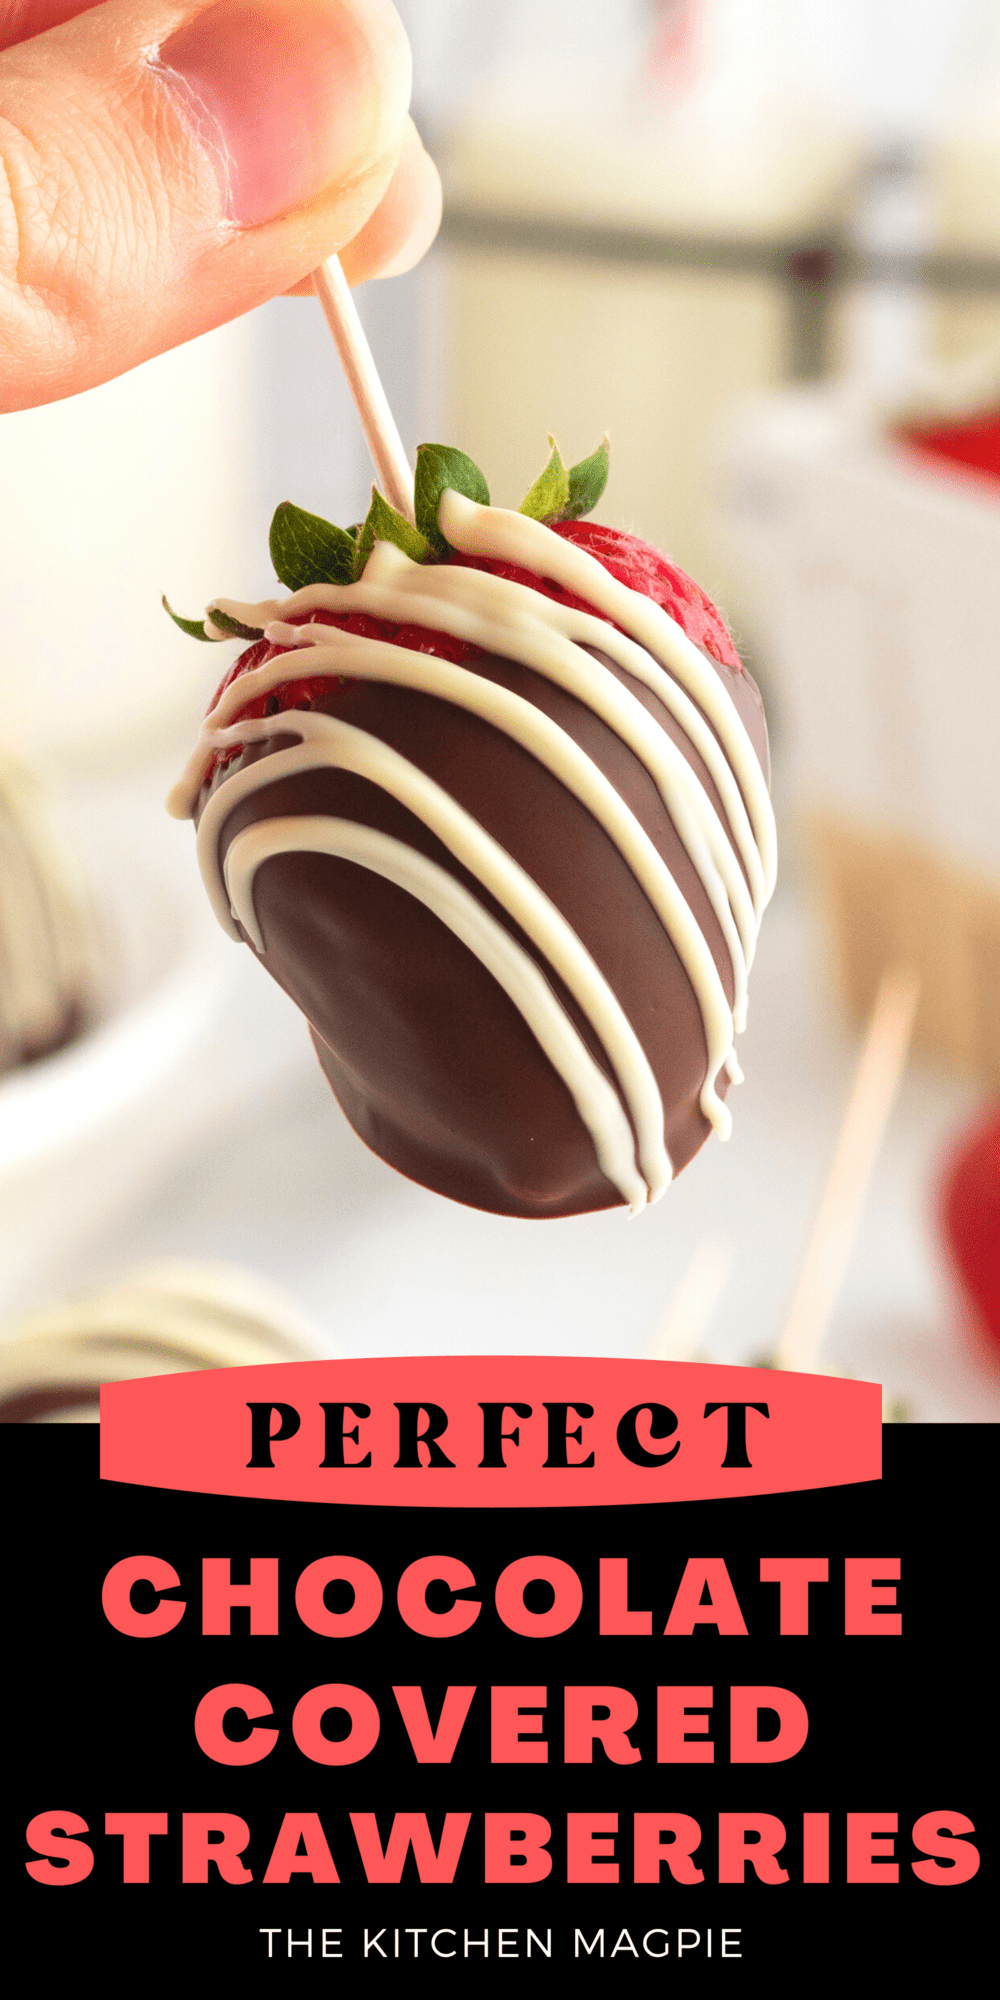 Chocolate covered strawberries are a sweet and lightly tart treat that you can easily make at home in very little time!